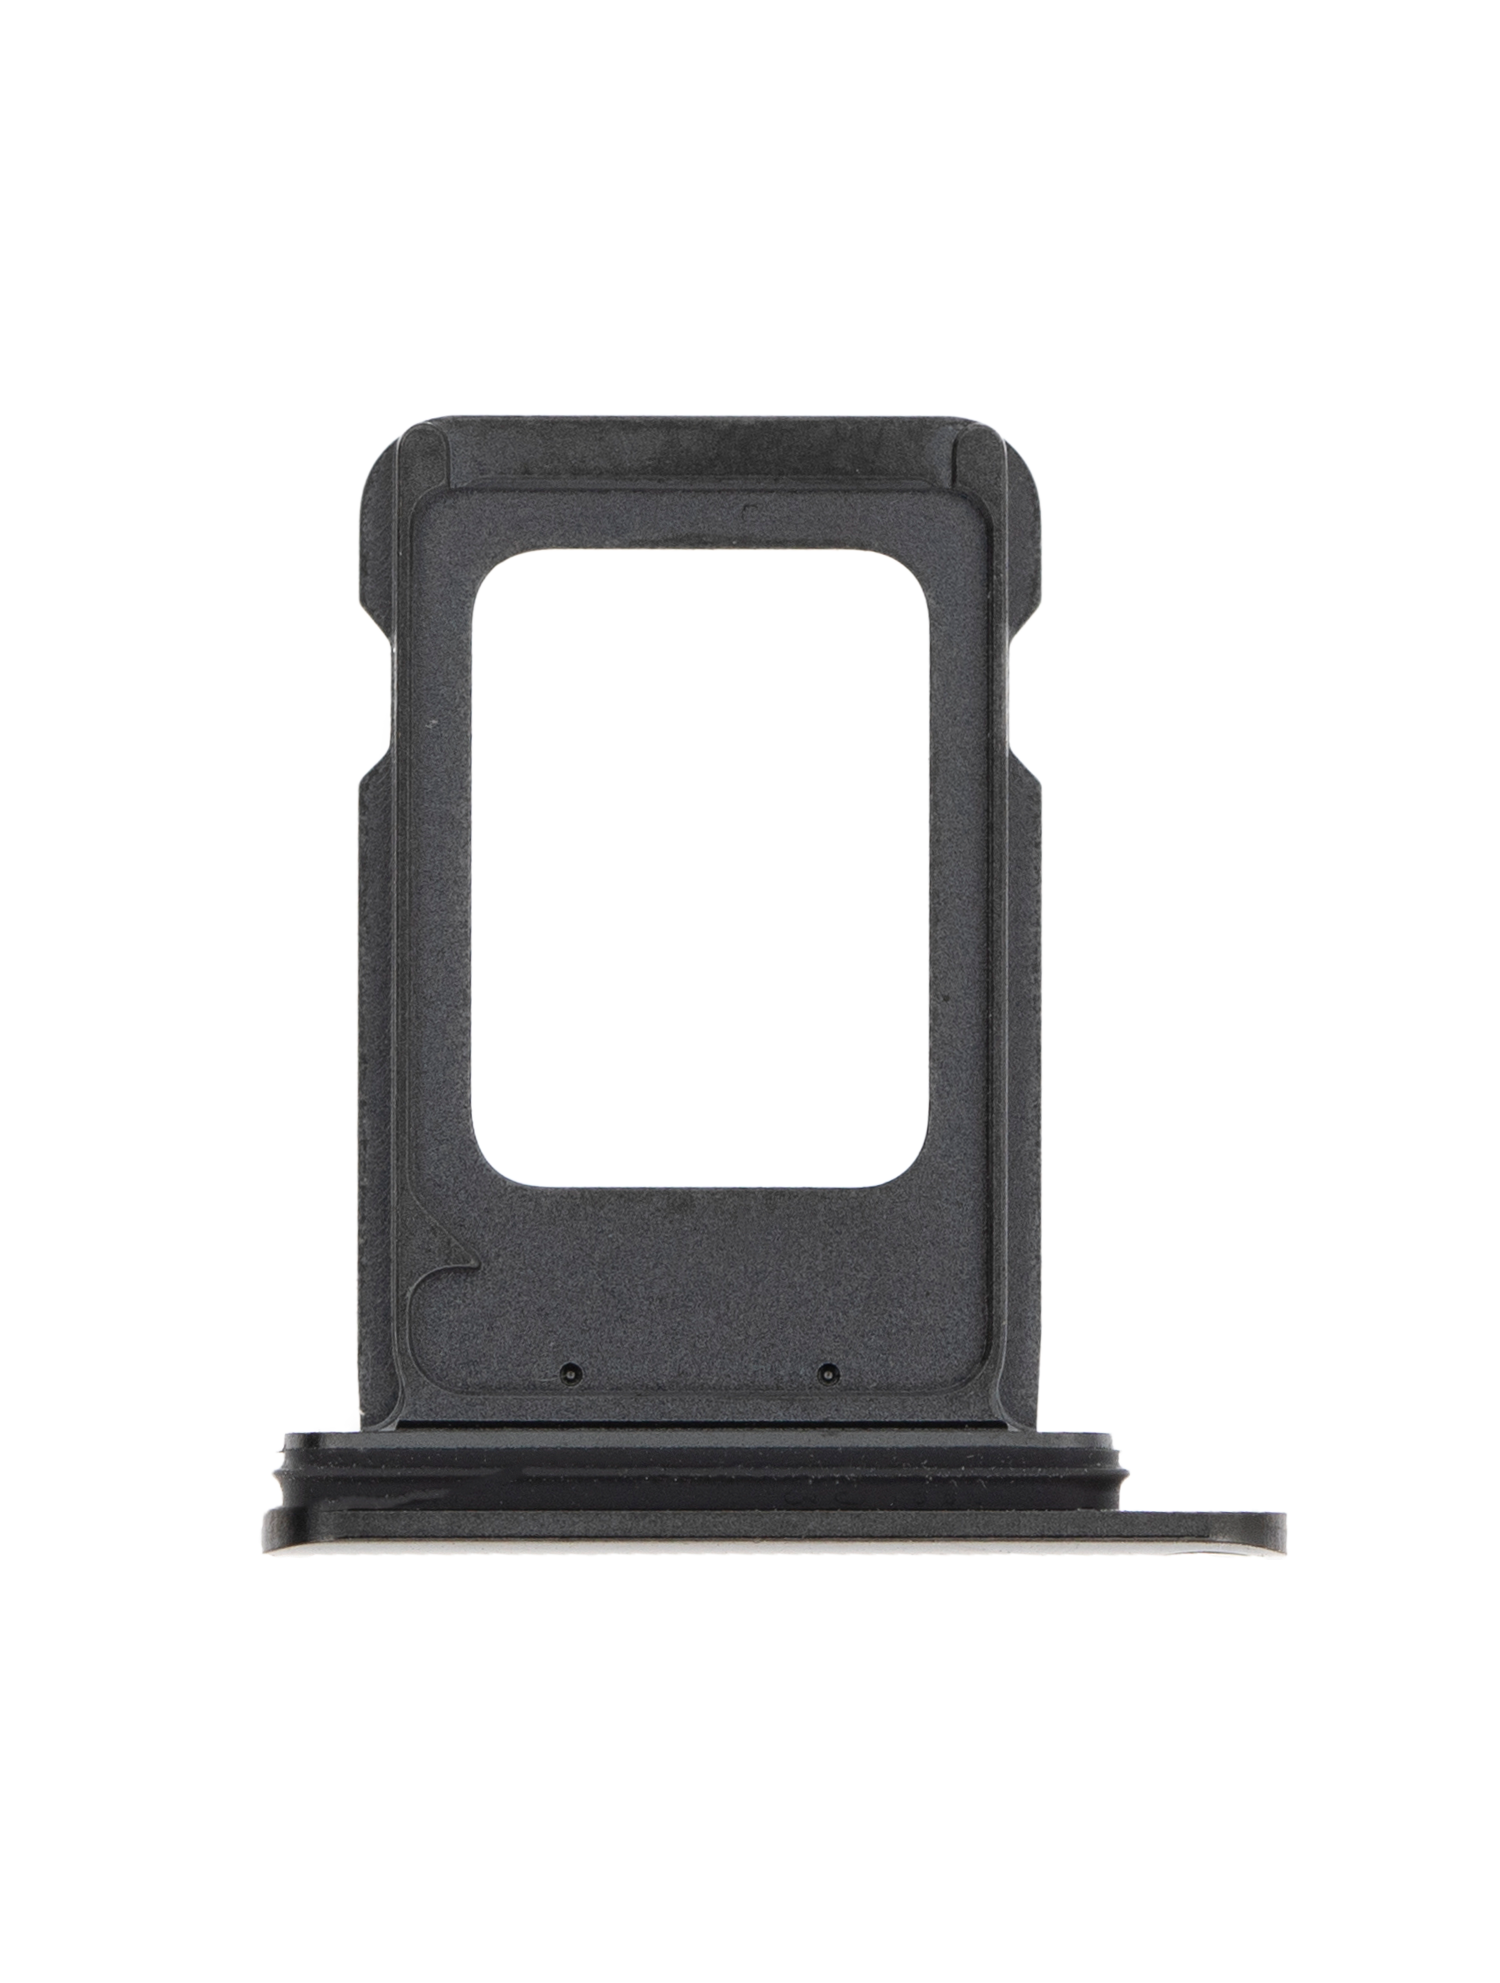 Sim Card Tray For IPhone 11 Pro / 11 Pro Max (Space Gray) (OEM Pull)